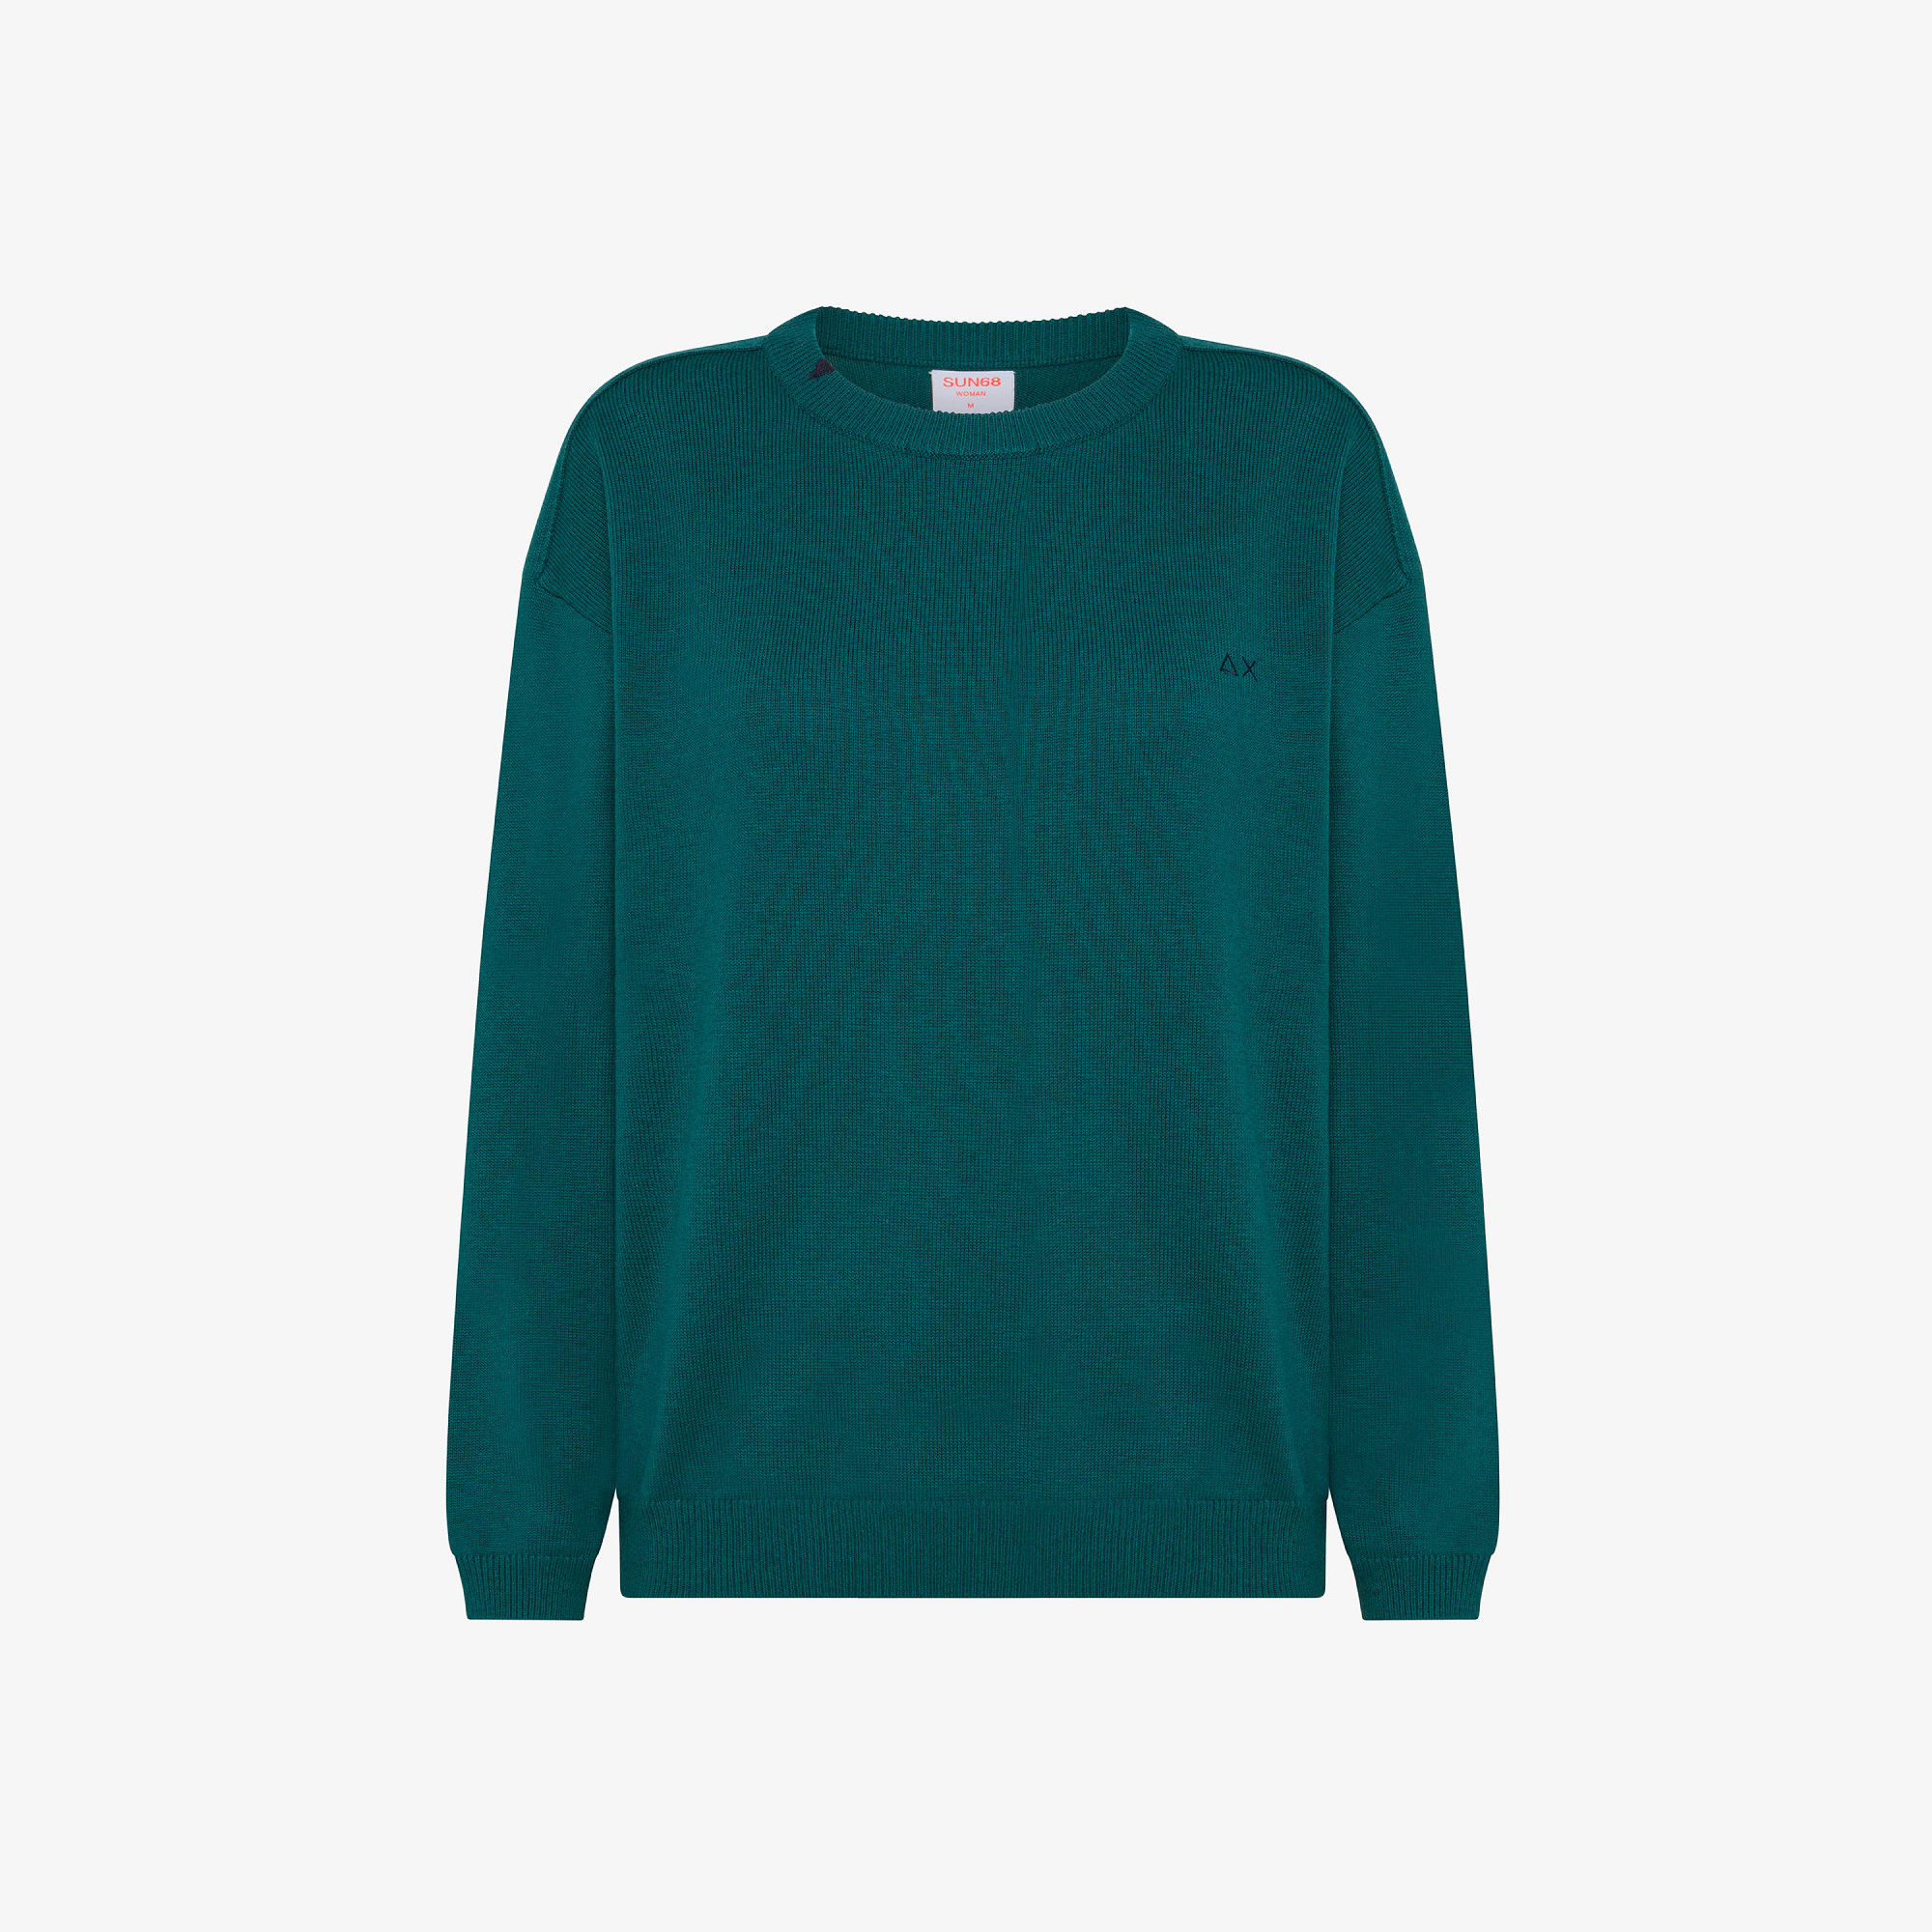 ROUND NECK SOLID L/S ENGLISH GREEN